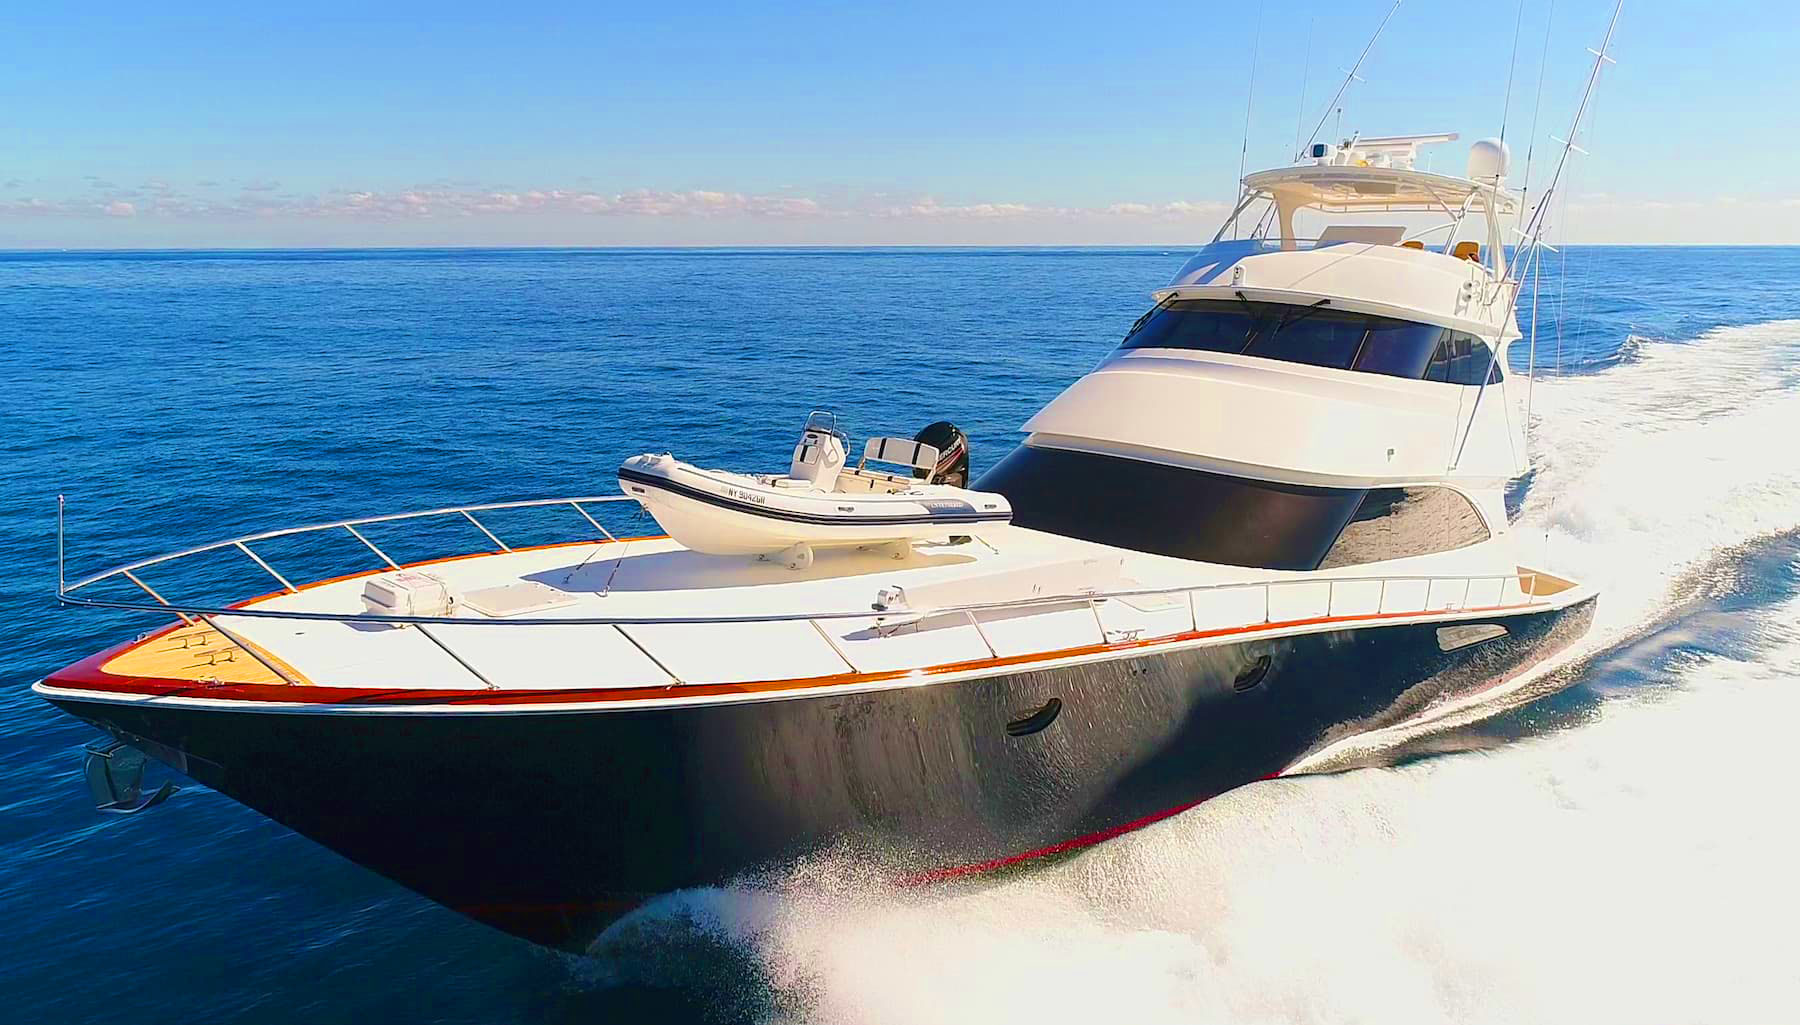 Traver Sells Yachts has two luxury yachts for sale!